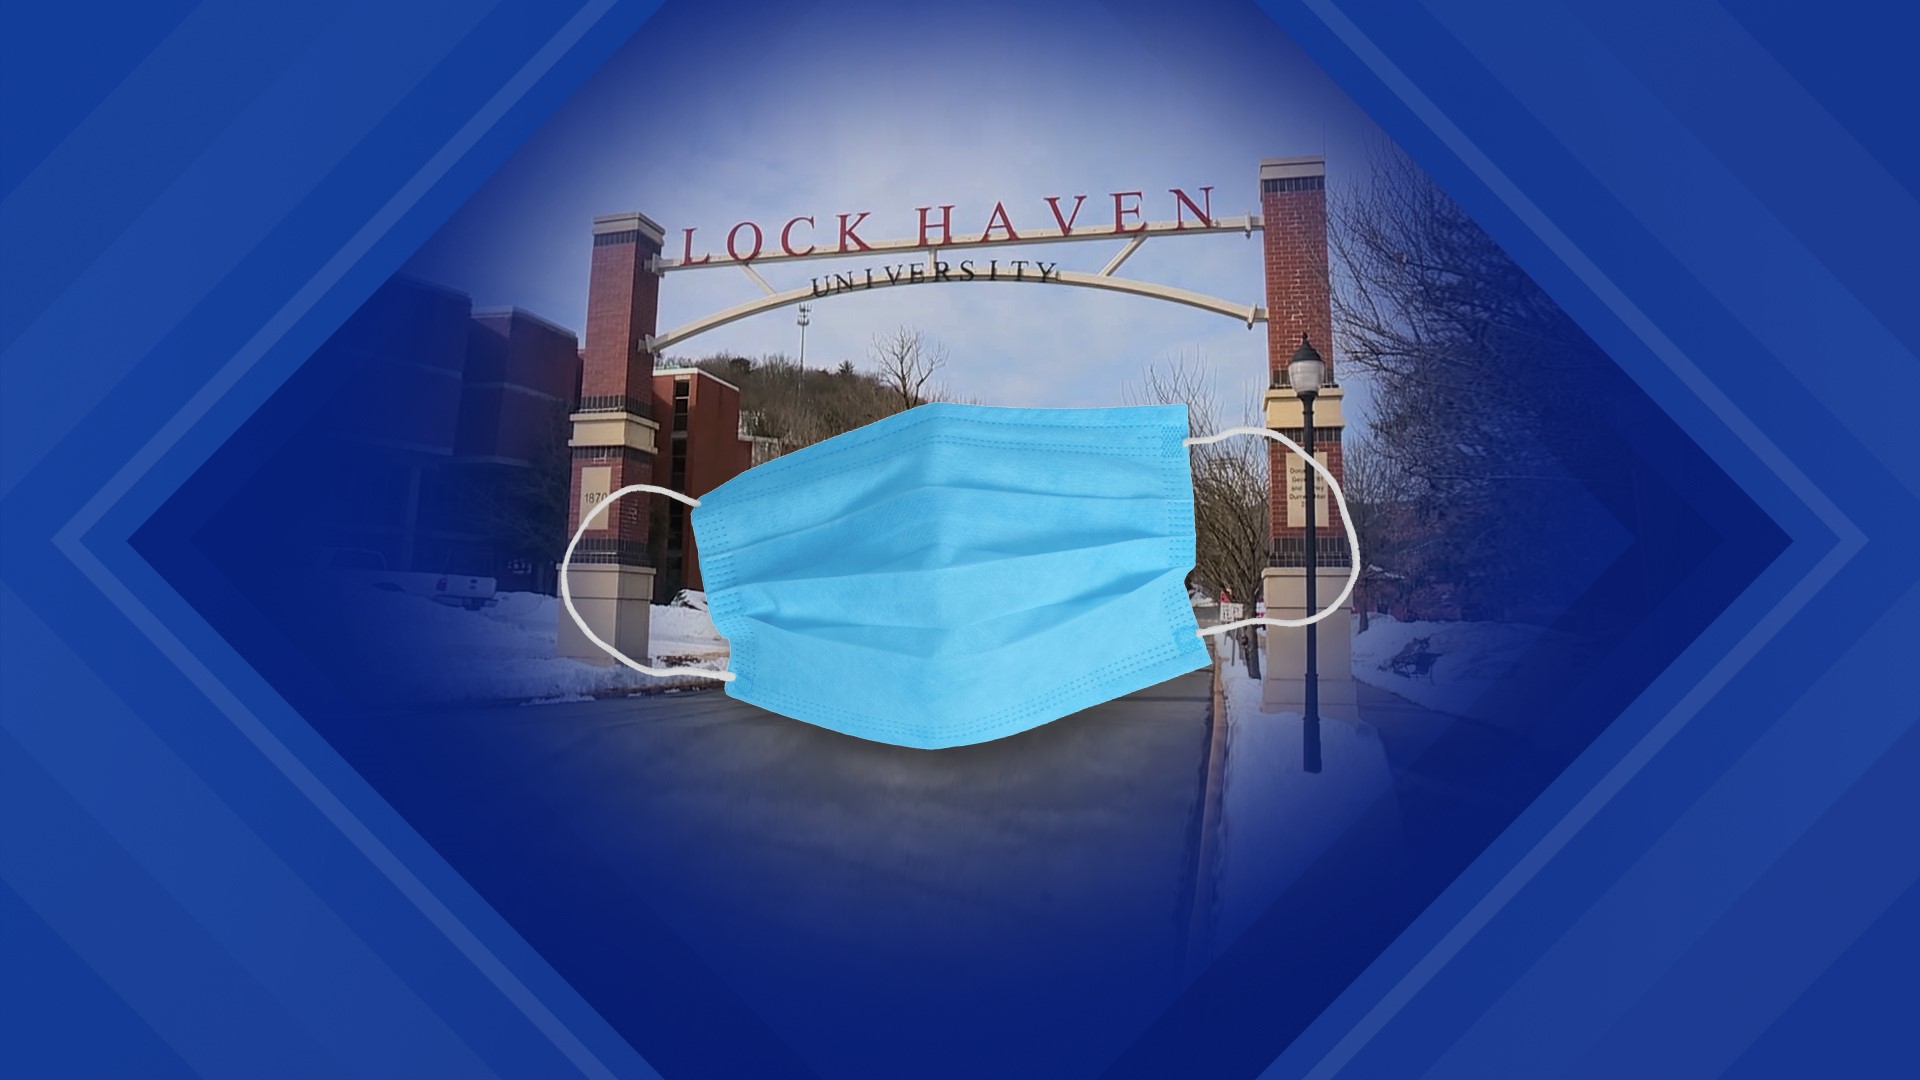 Lock Haven University has four winter sports programs that will play without fans in the stands.